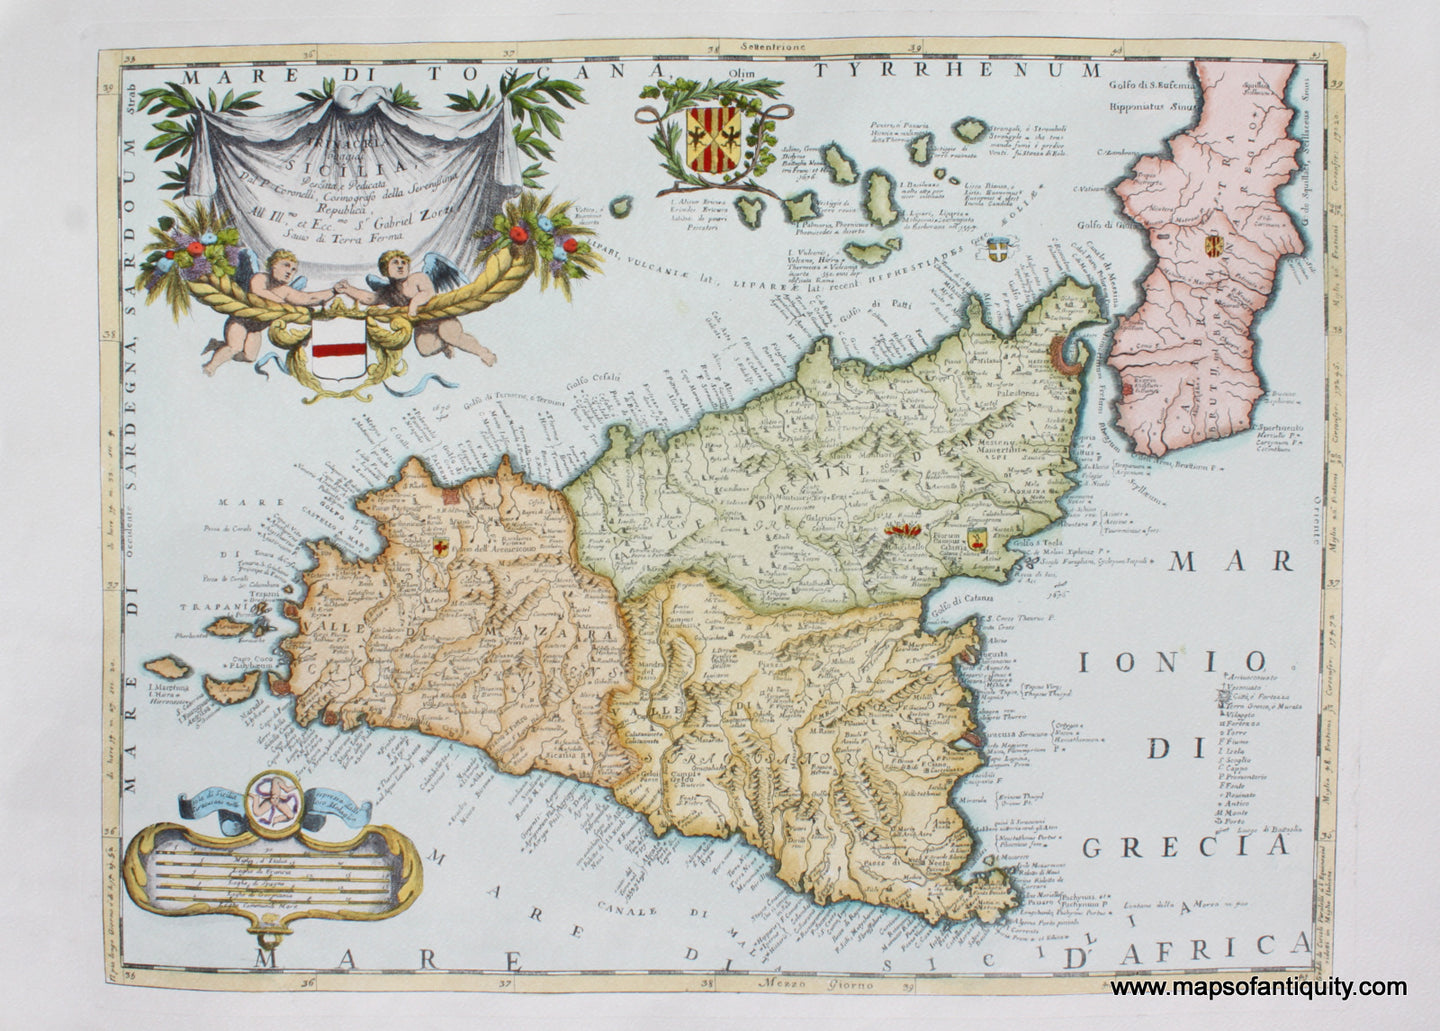 Digitally-Engraved-Specialty-Reproduction-Trinacria-hoggidi-Sicilia-(Reproduction)-**********-Reproductions---Reproduction-Maps-Of-Antiquity